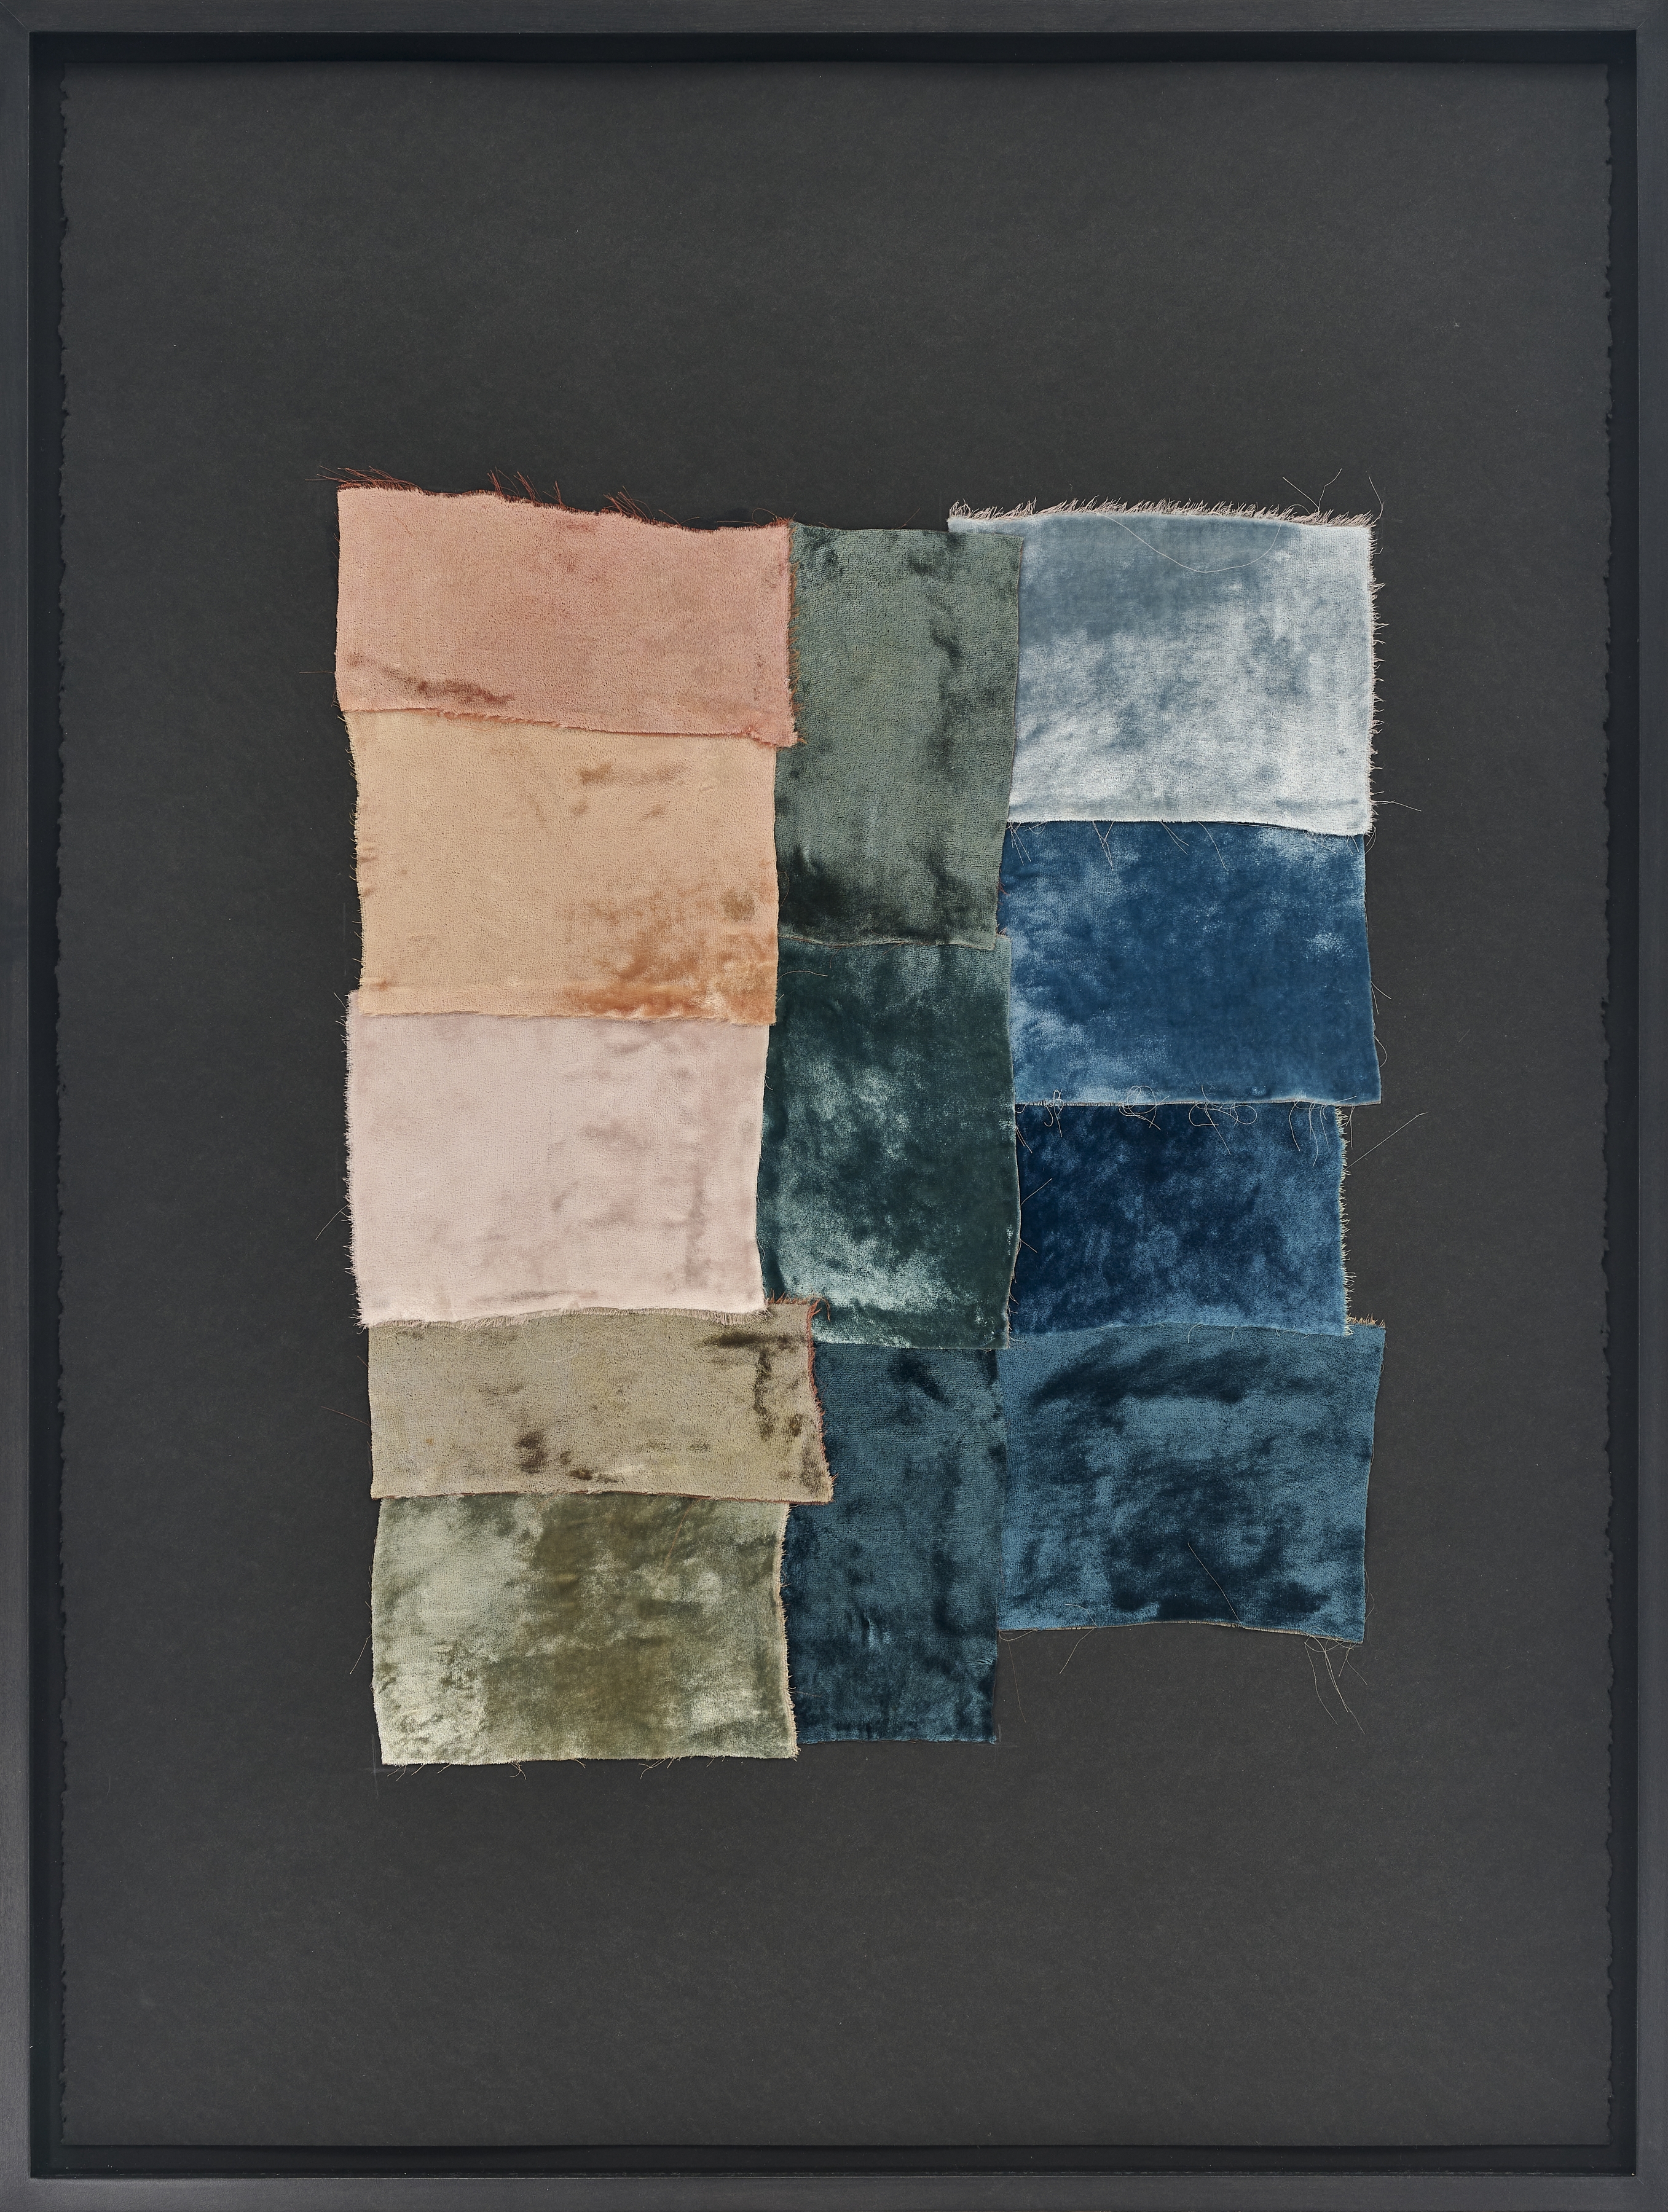 Yto Barrada

Velvet Collage

2021
Silk velvet dyes from plant extracts mounted on board

Work: 76.2 x 57.2 cm